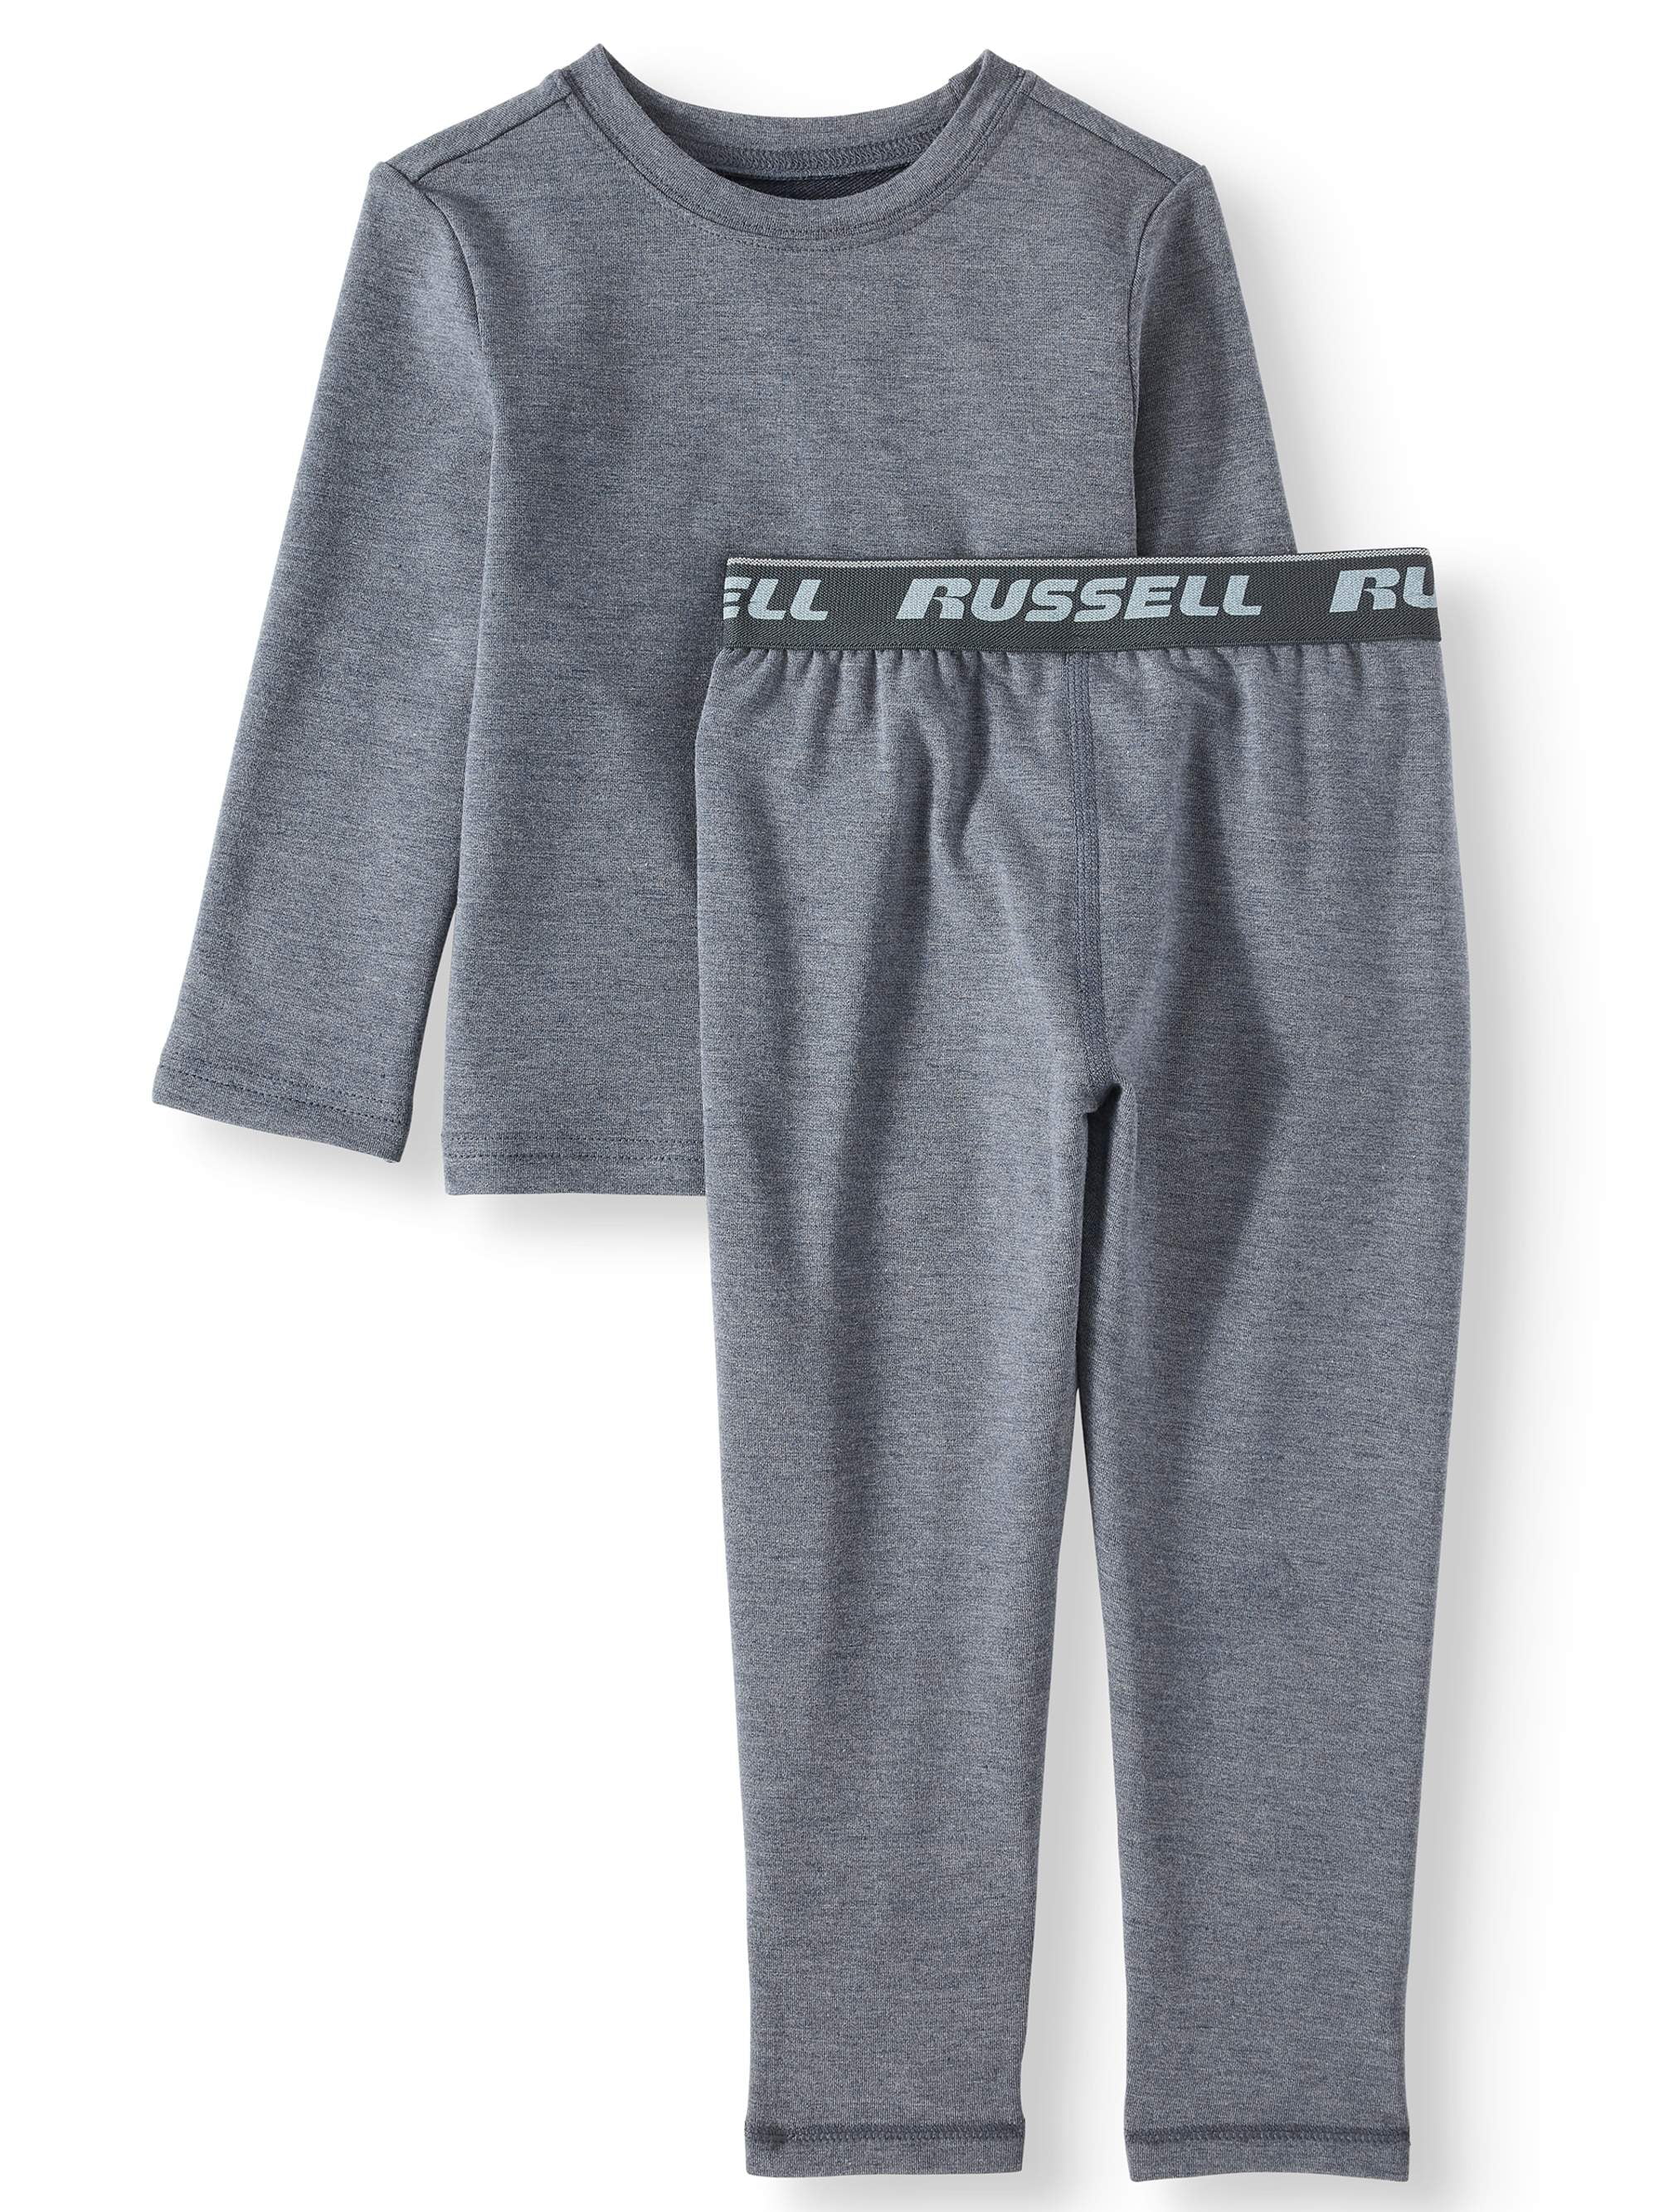 Mid-Weight Performance Baselayer Thermal Top & Pants, 2pc Set (Toddler Boys)